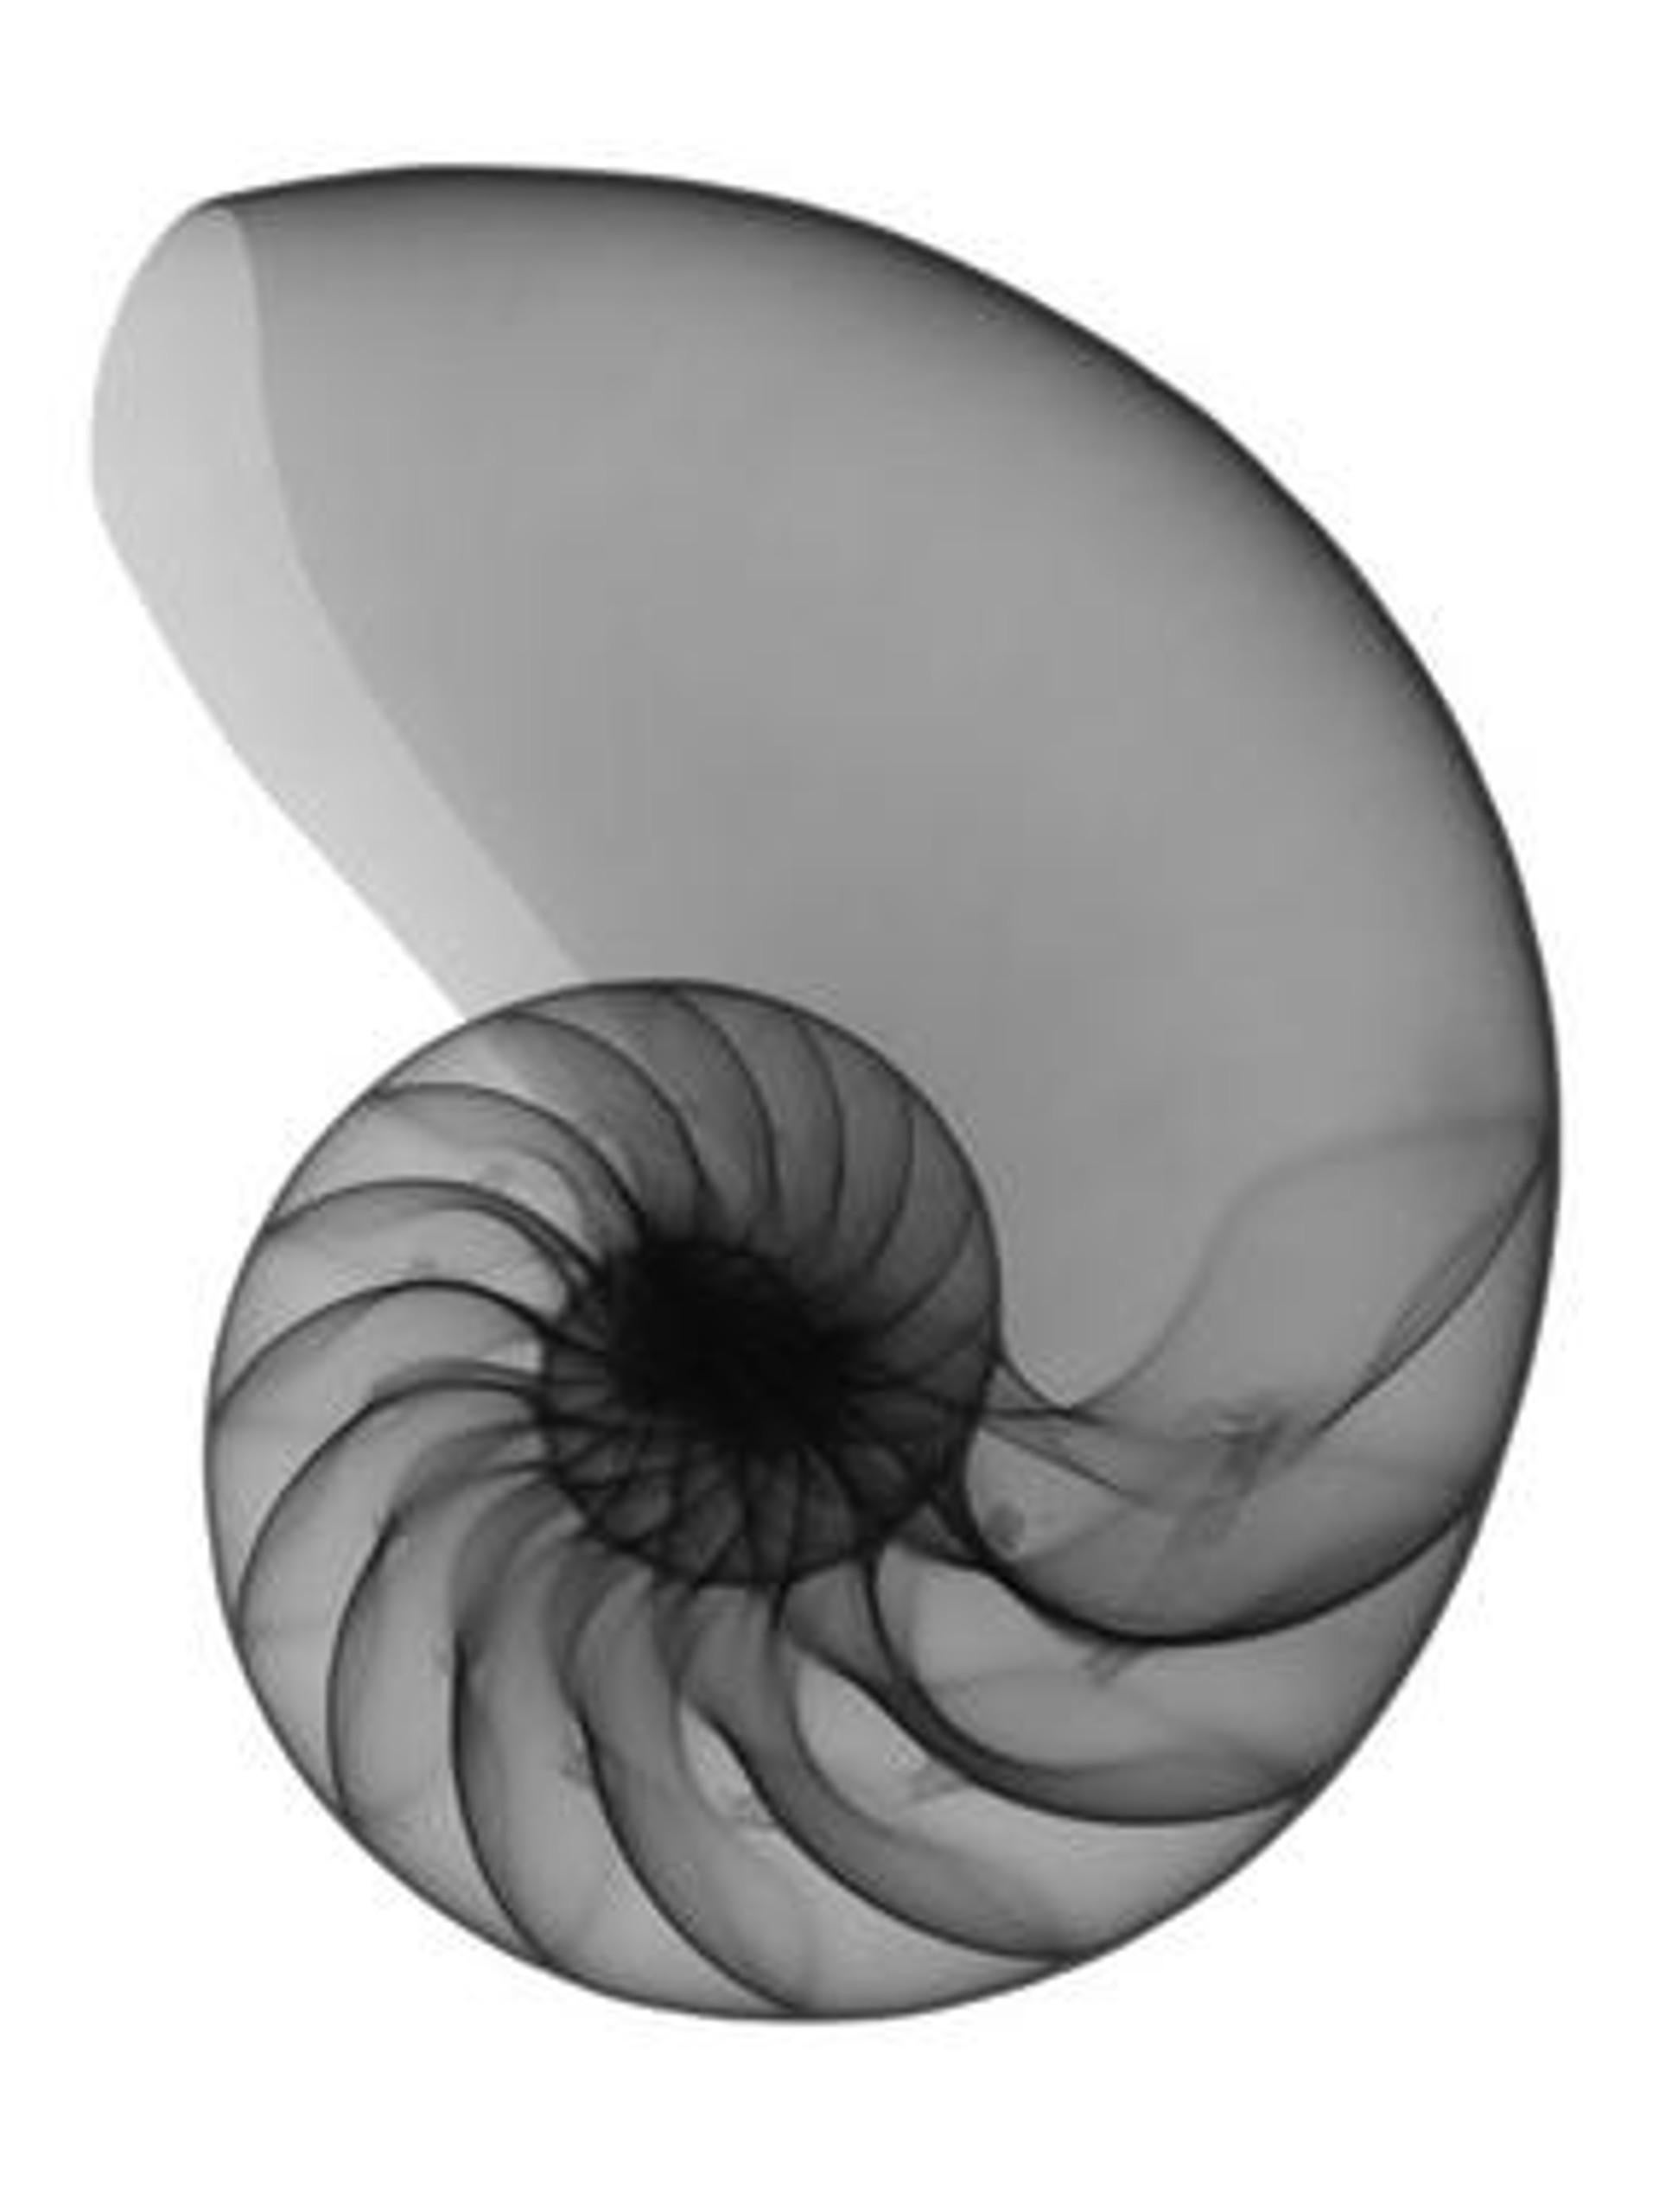 Don Dudenbostel Abstract Print - Chambered Nautilus #1